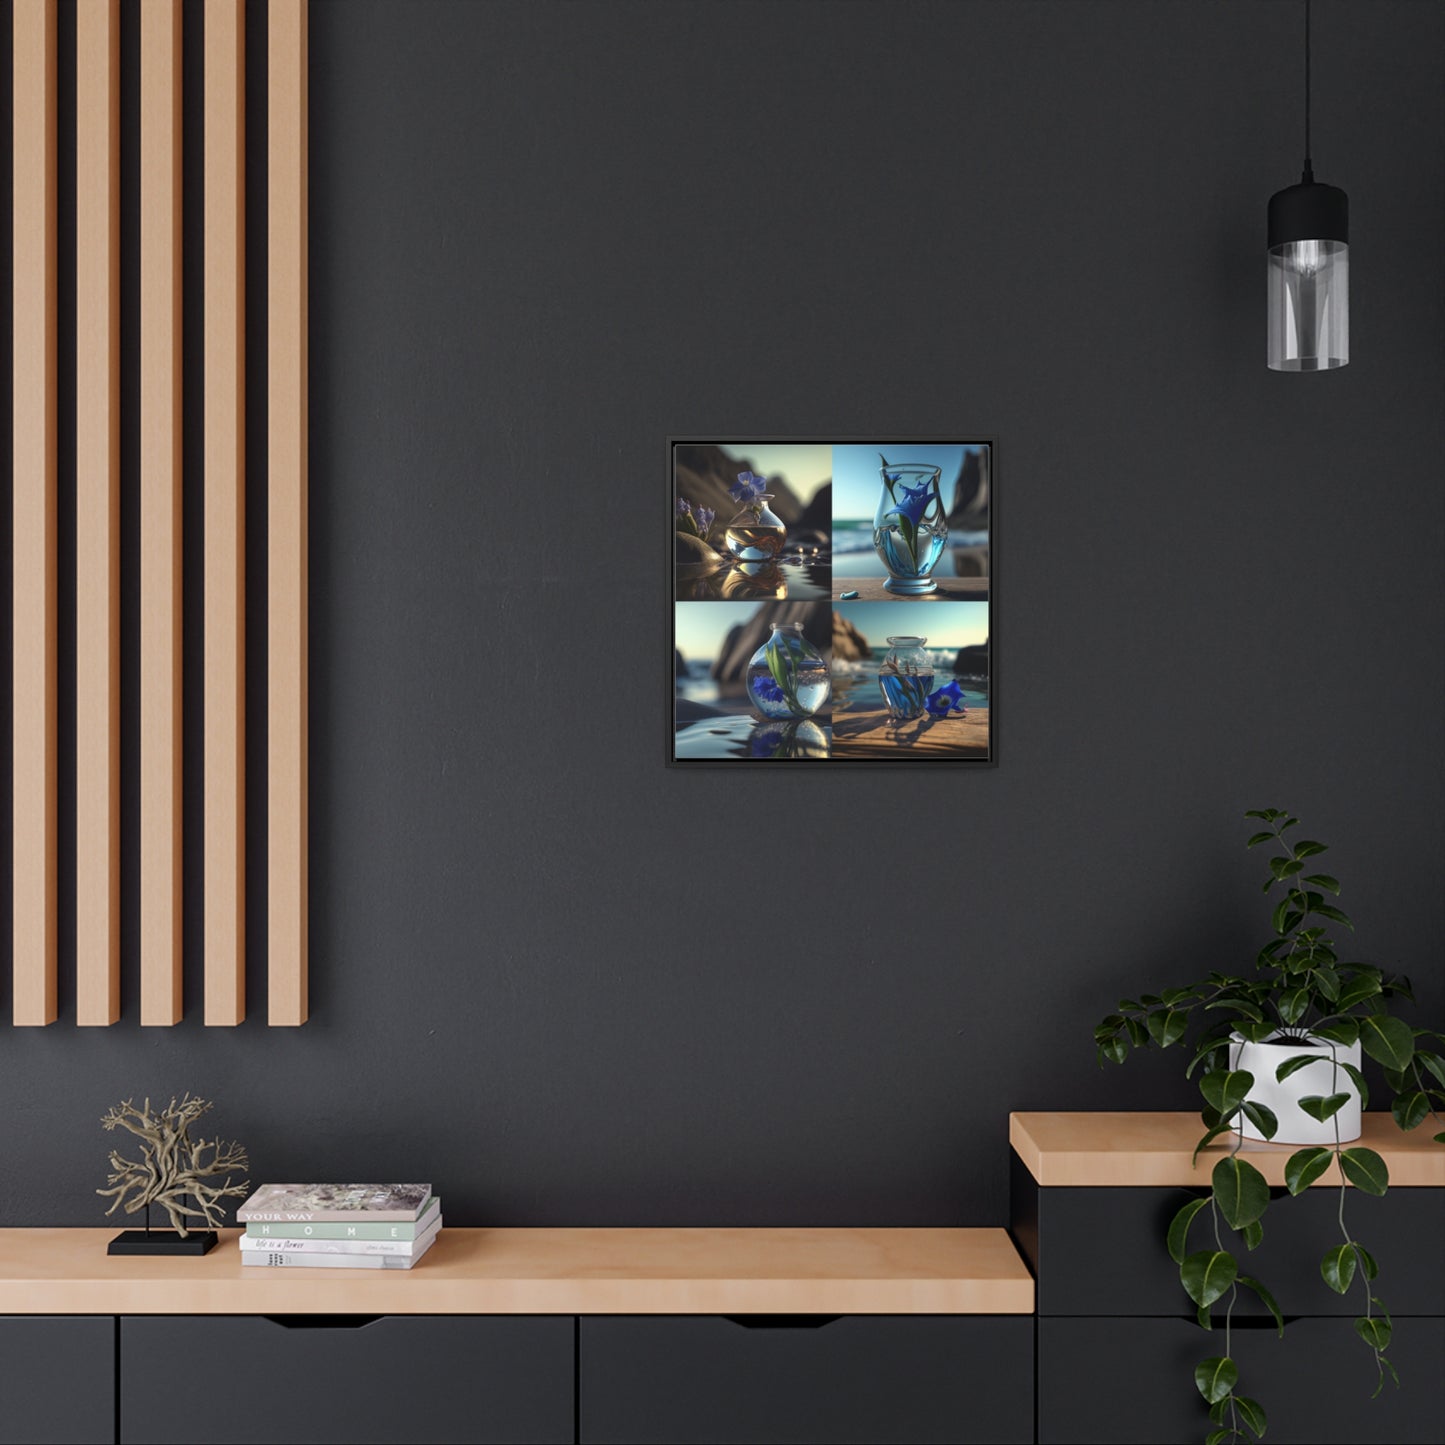 Gallery Canvas Wraps, Square Frame The Bluebell 5